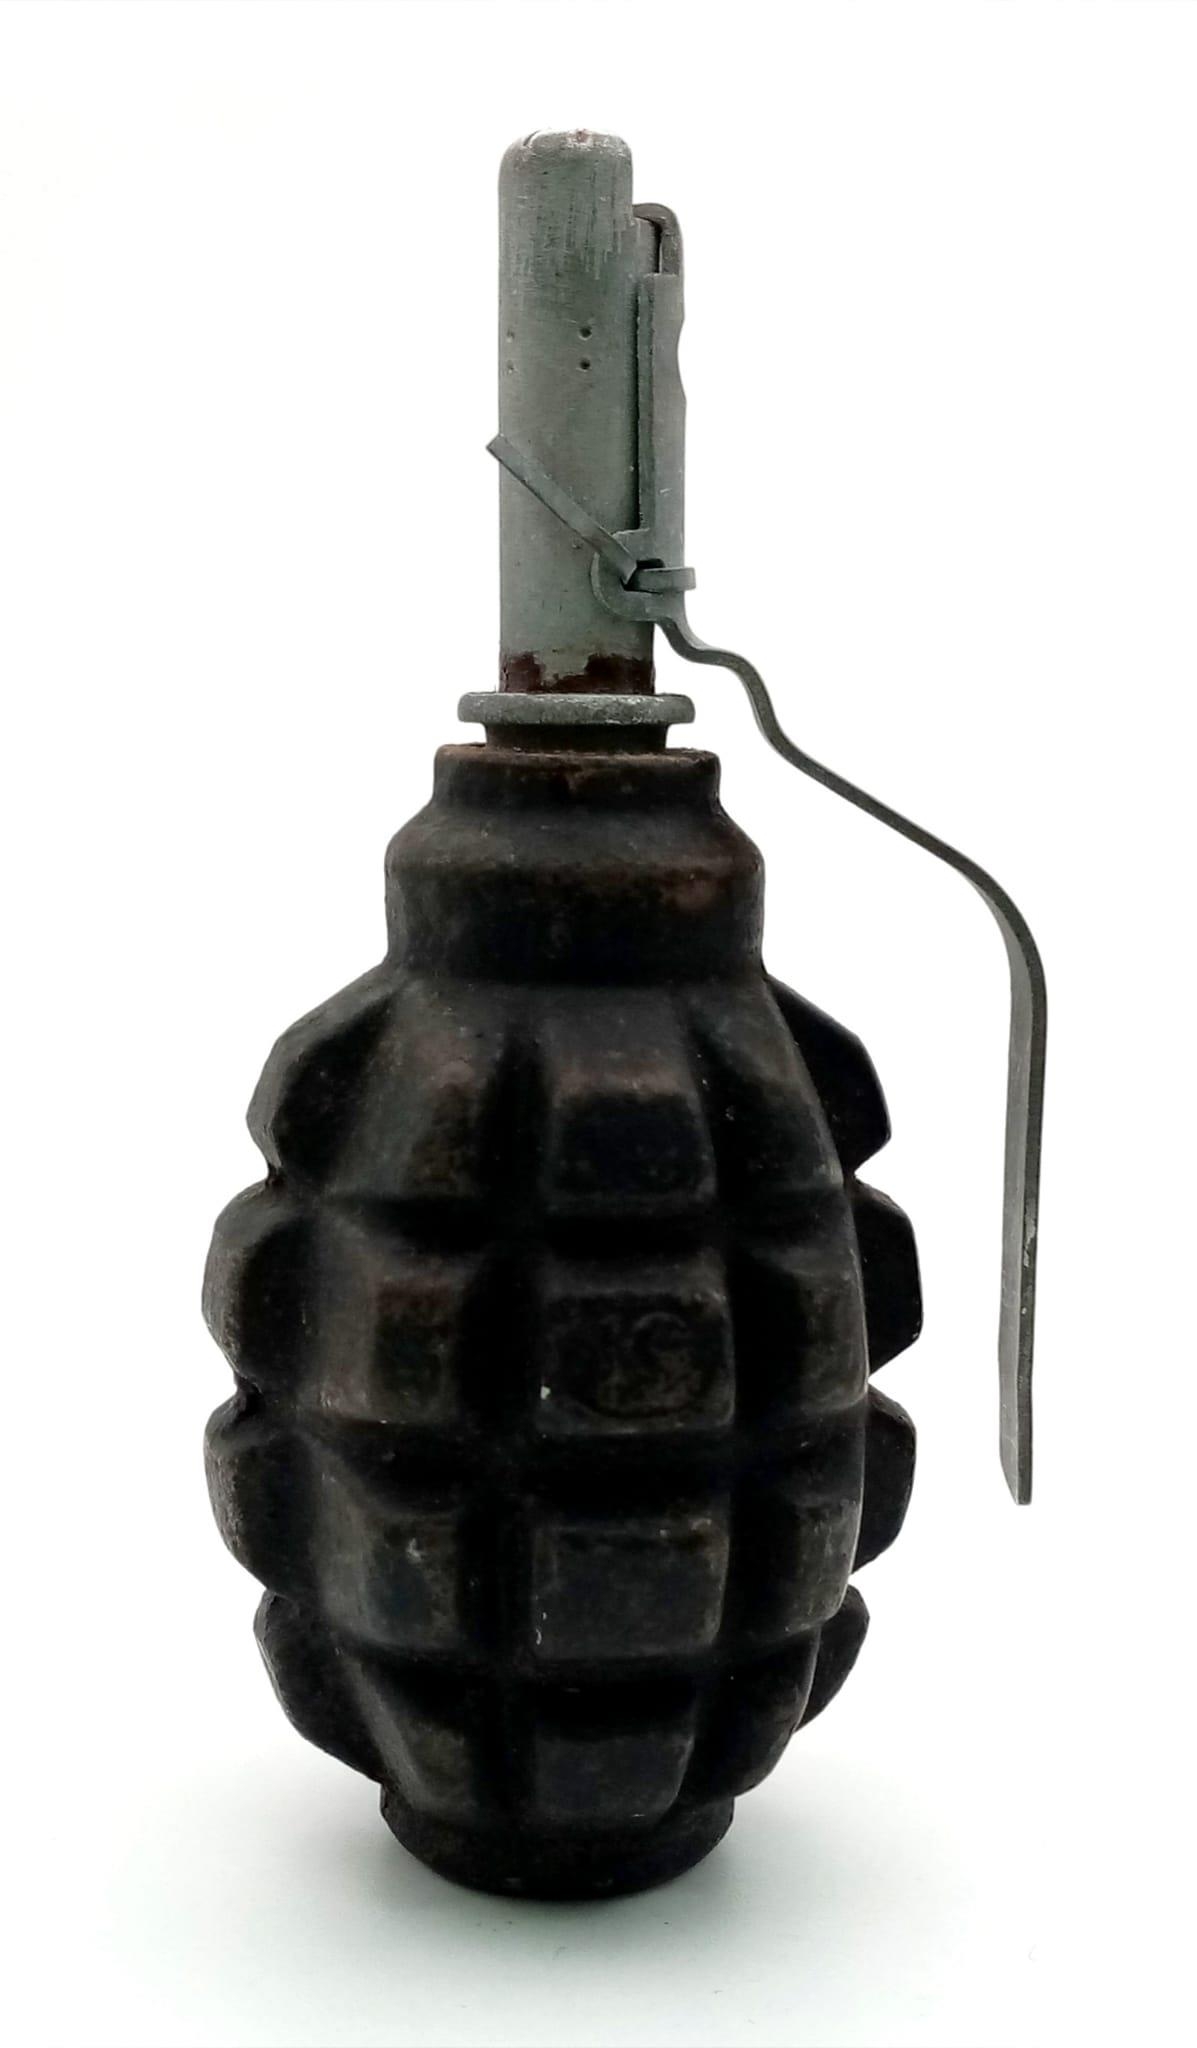 A WW2 Pattern F-1 Deactivated Pineapple Grenade in good condition.